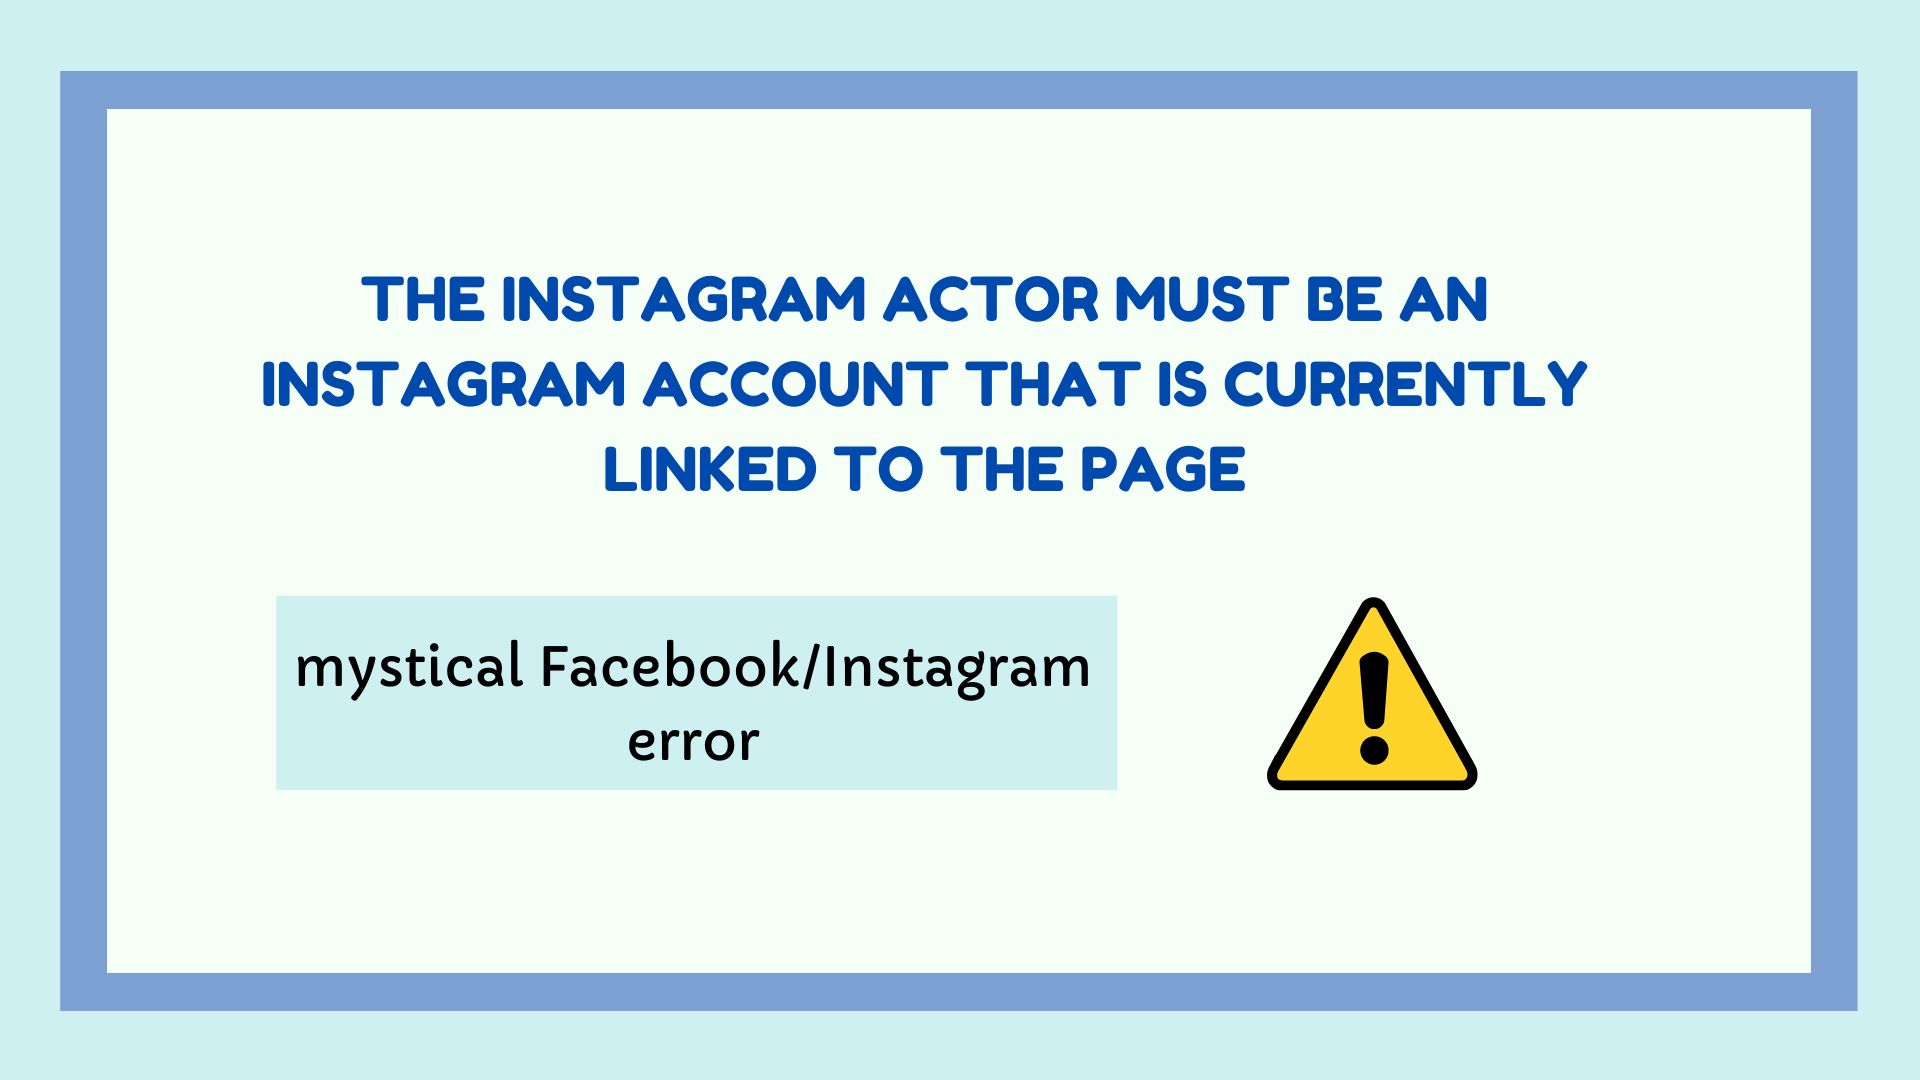 You are currently viewing How to fix mystical Facebook/Instagram error: The Instagram actor must be an Instagram account that is currently linked to the Page